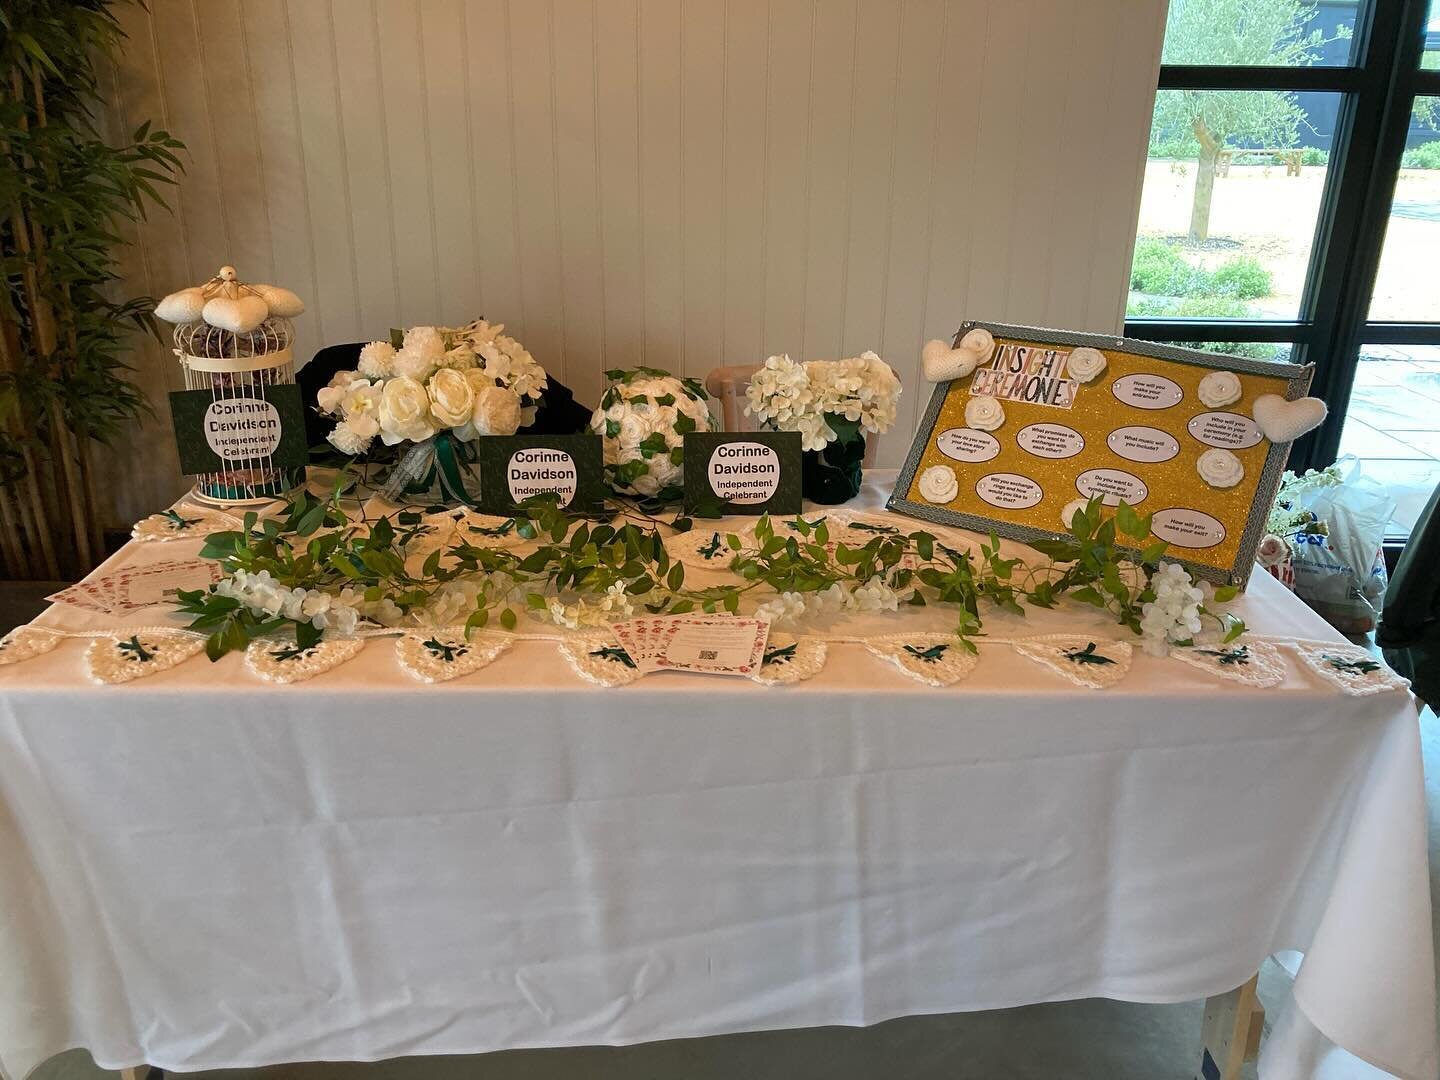 Stand set up - all ready to meet some lovely wedding couples who are after a personal, bespoke wedding ceremony!